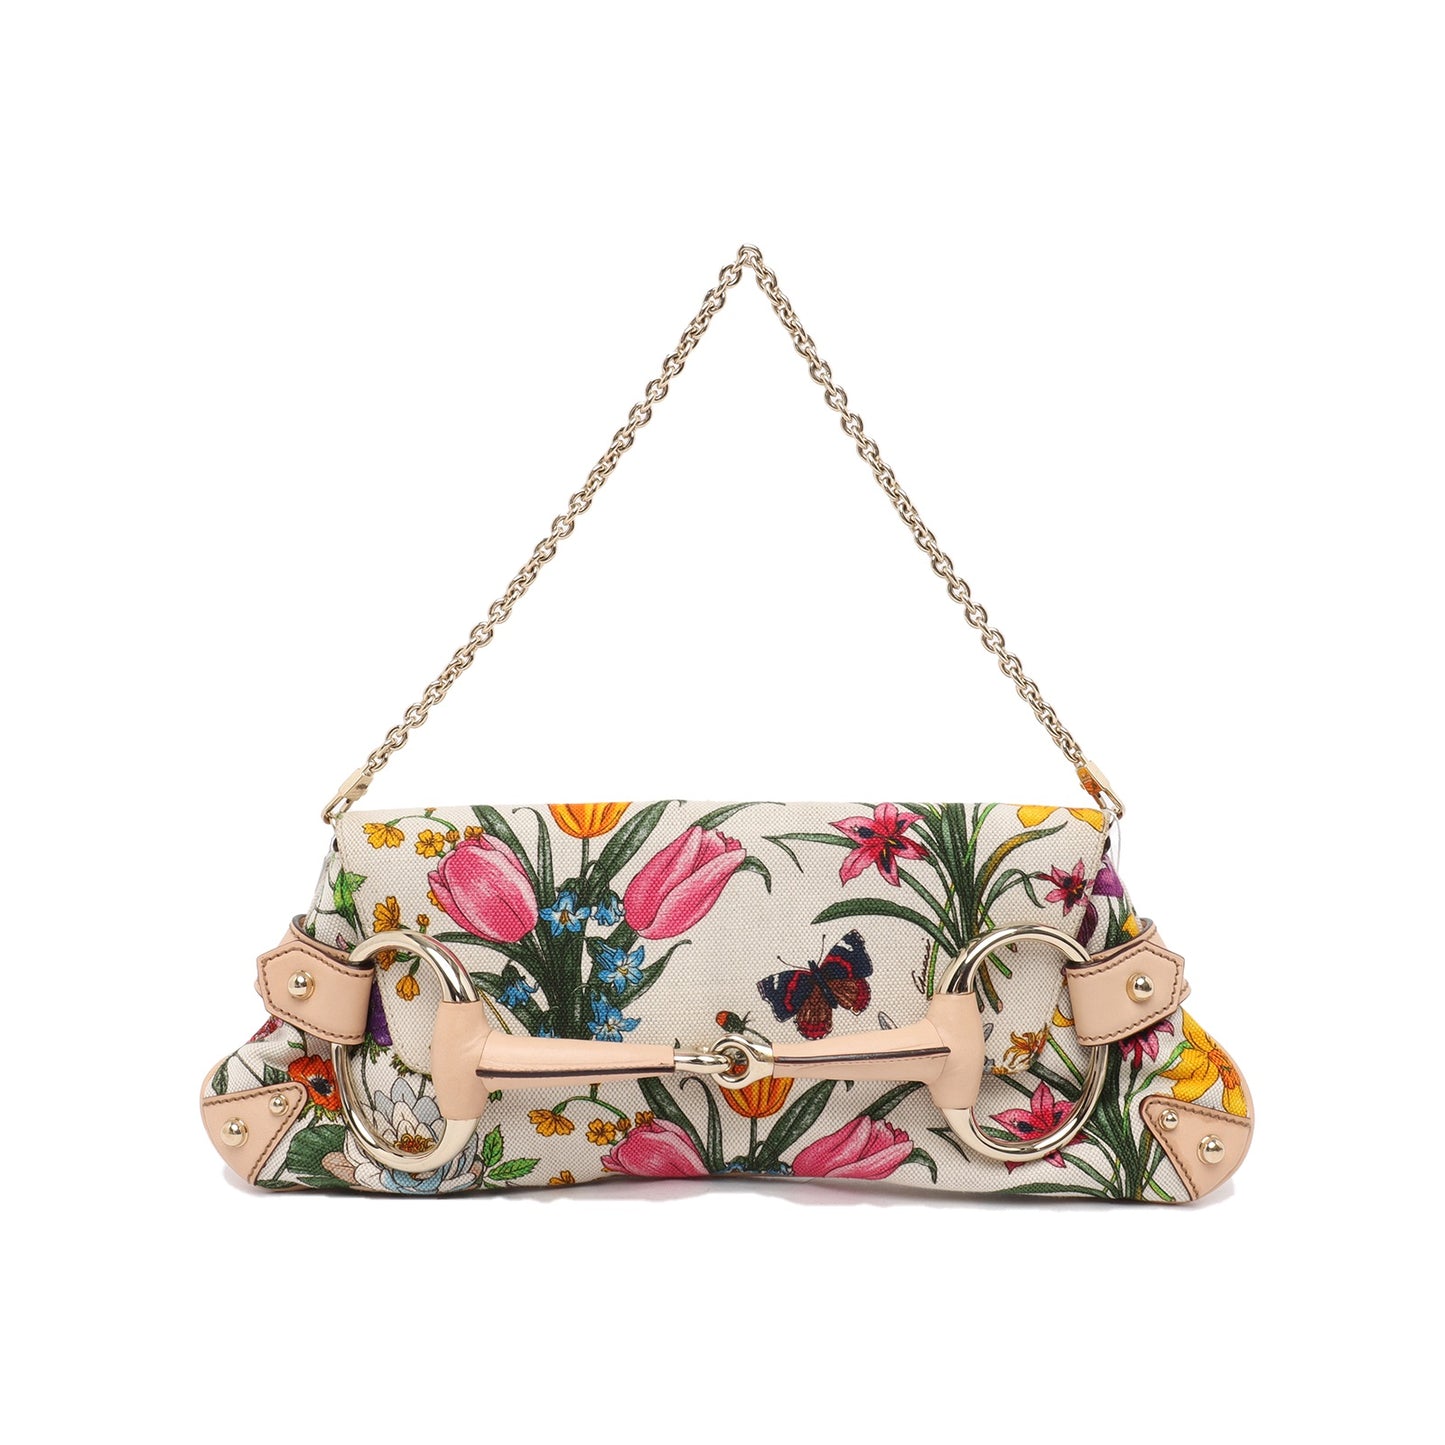 Gucci Horsebit 1955 Chain Shoulder bag in Limited edition floral print-Luxbags